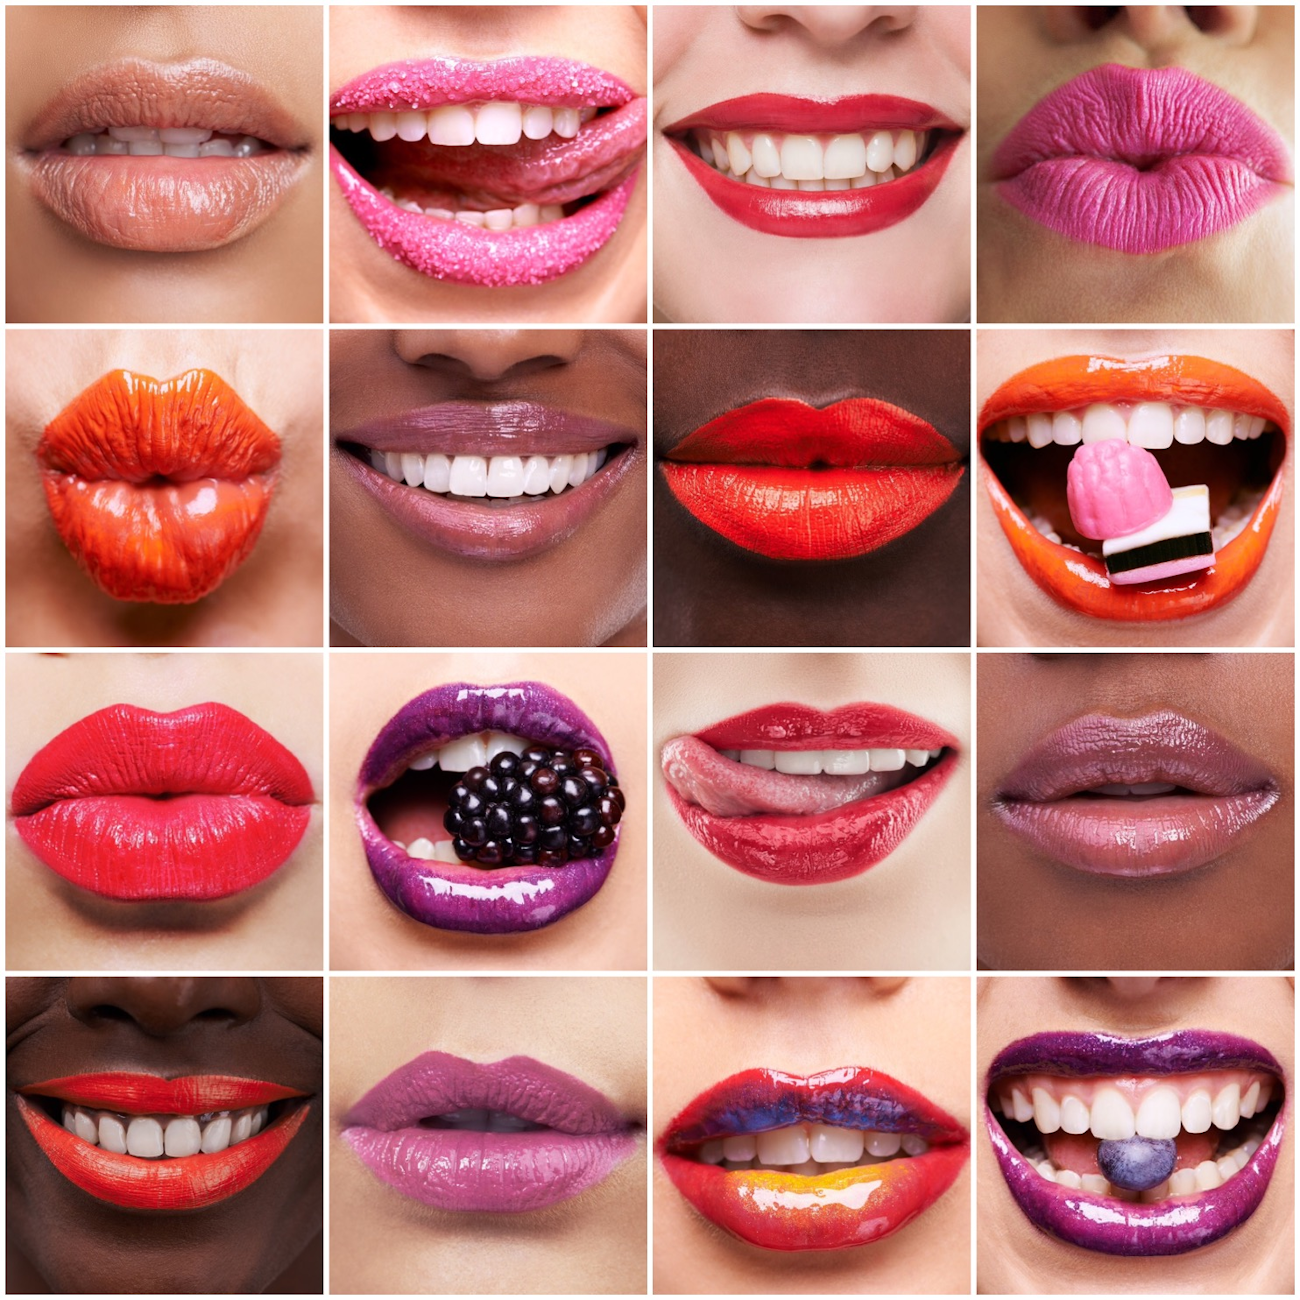 Best Lip Treatments in time for Valentine’s Day